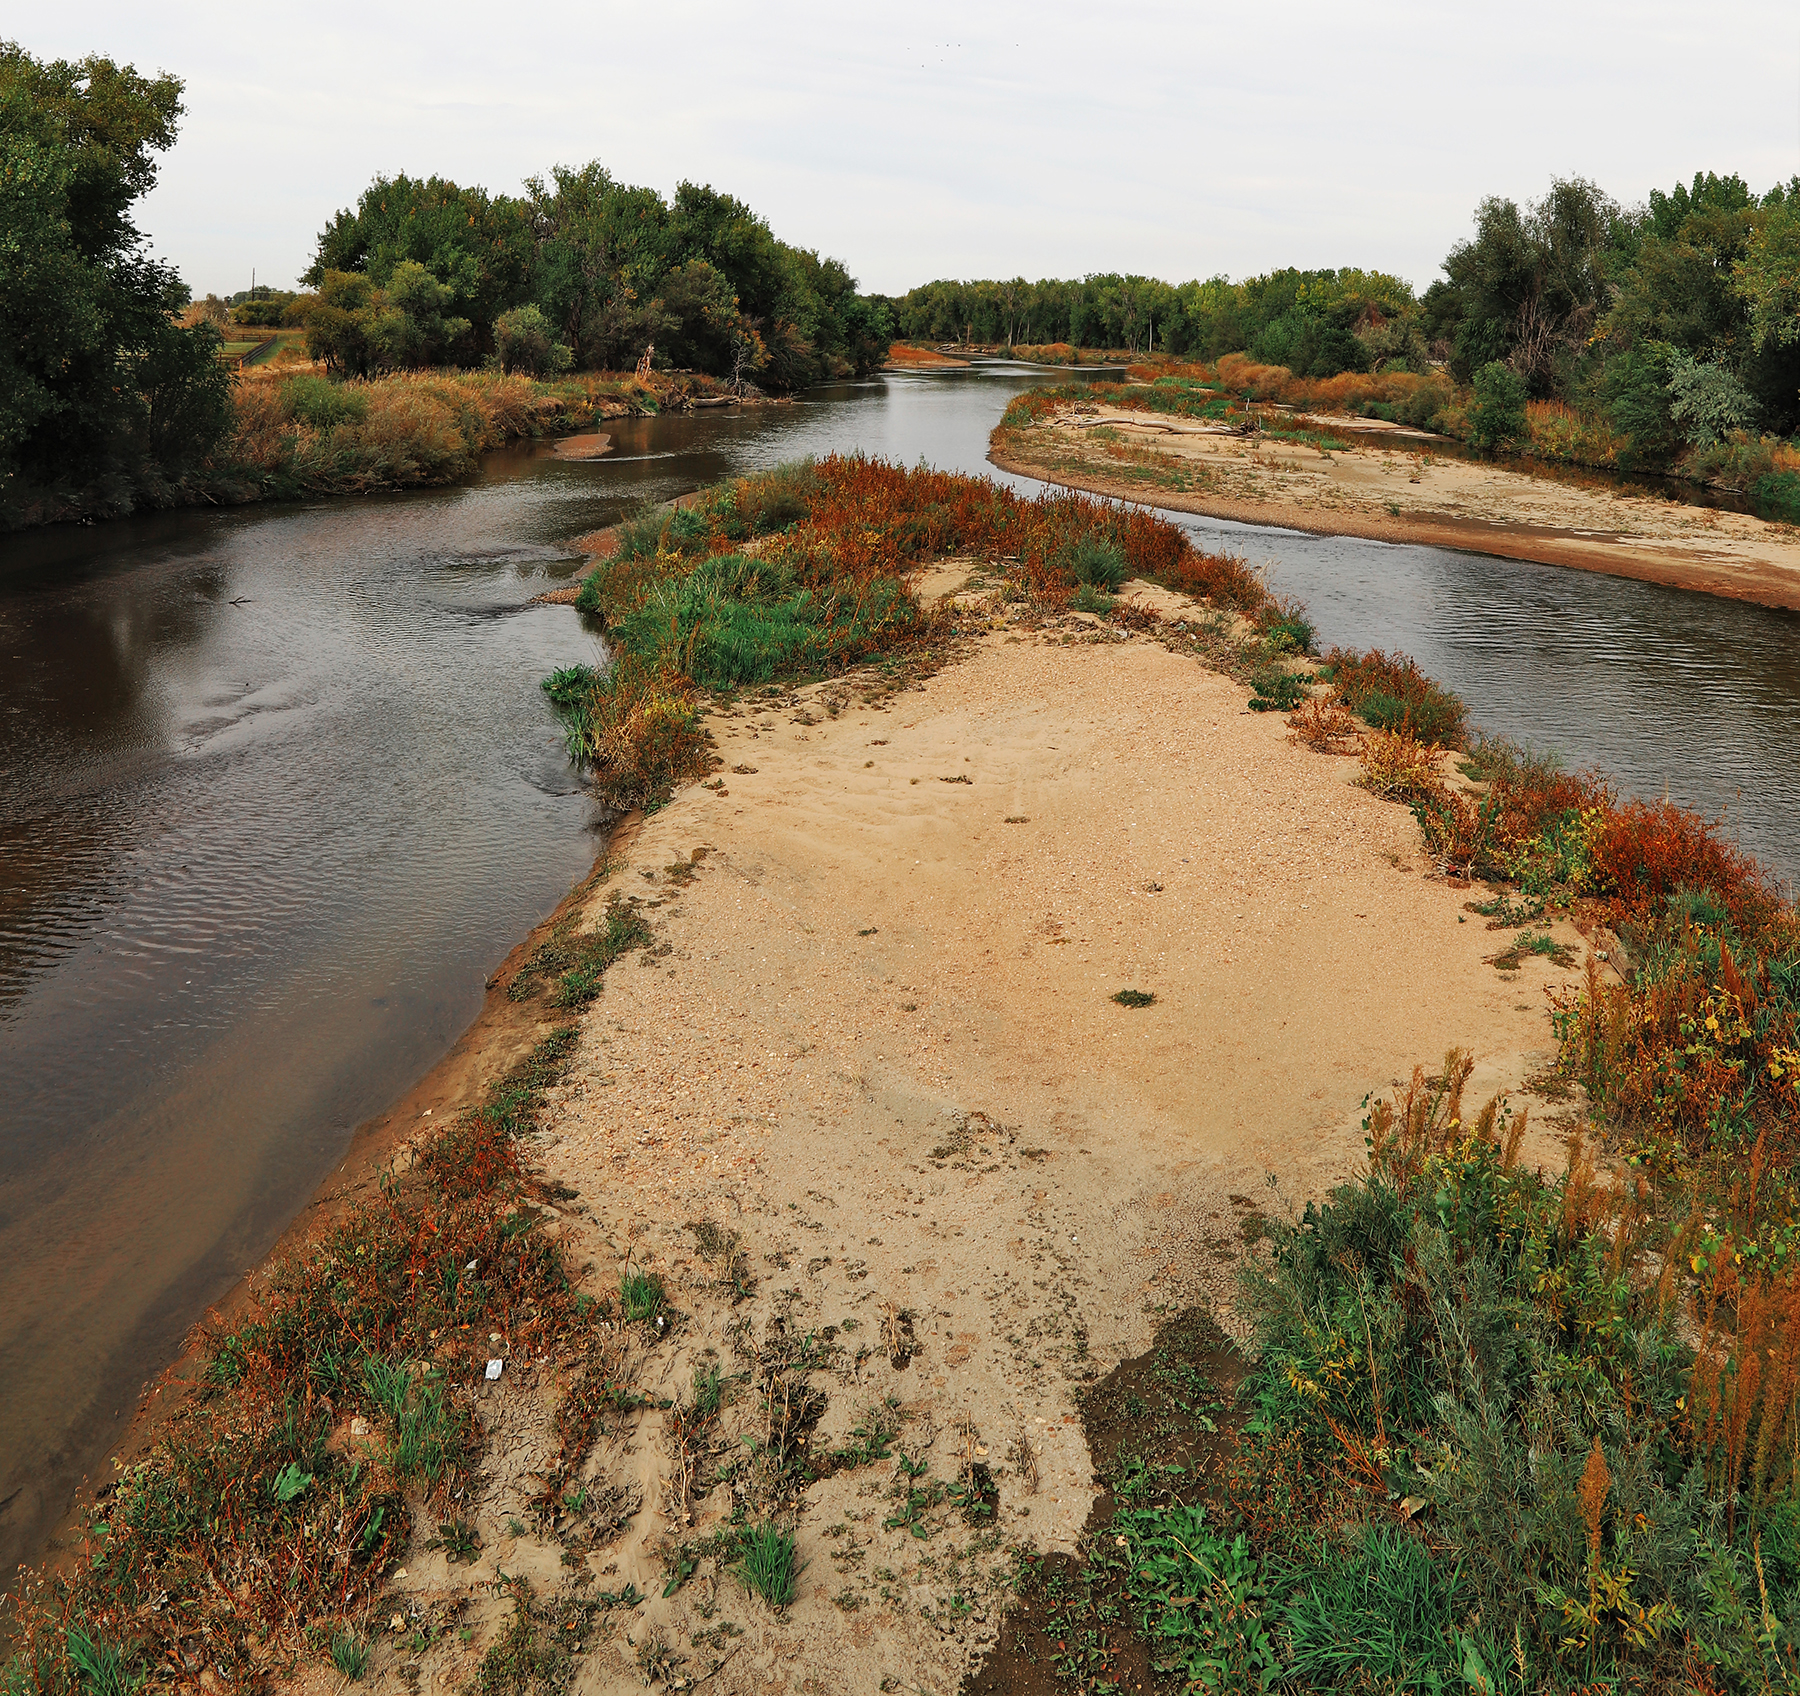 New Data Tools May Reduce Impacts of Colorado River Basin Drought, Article